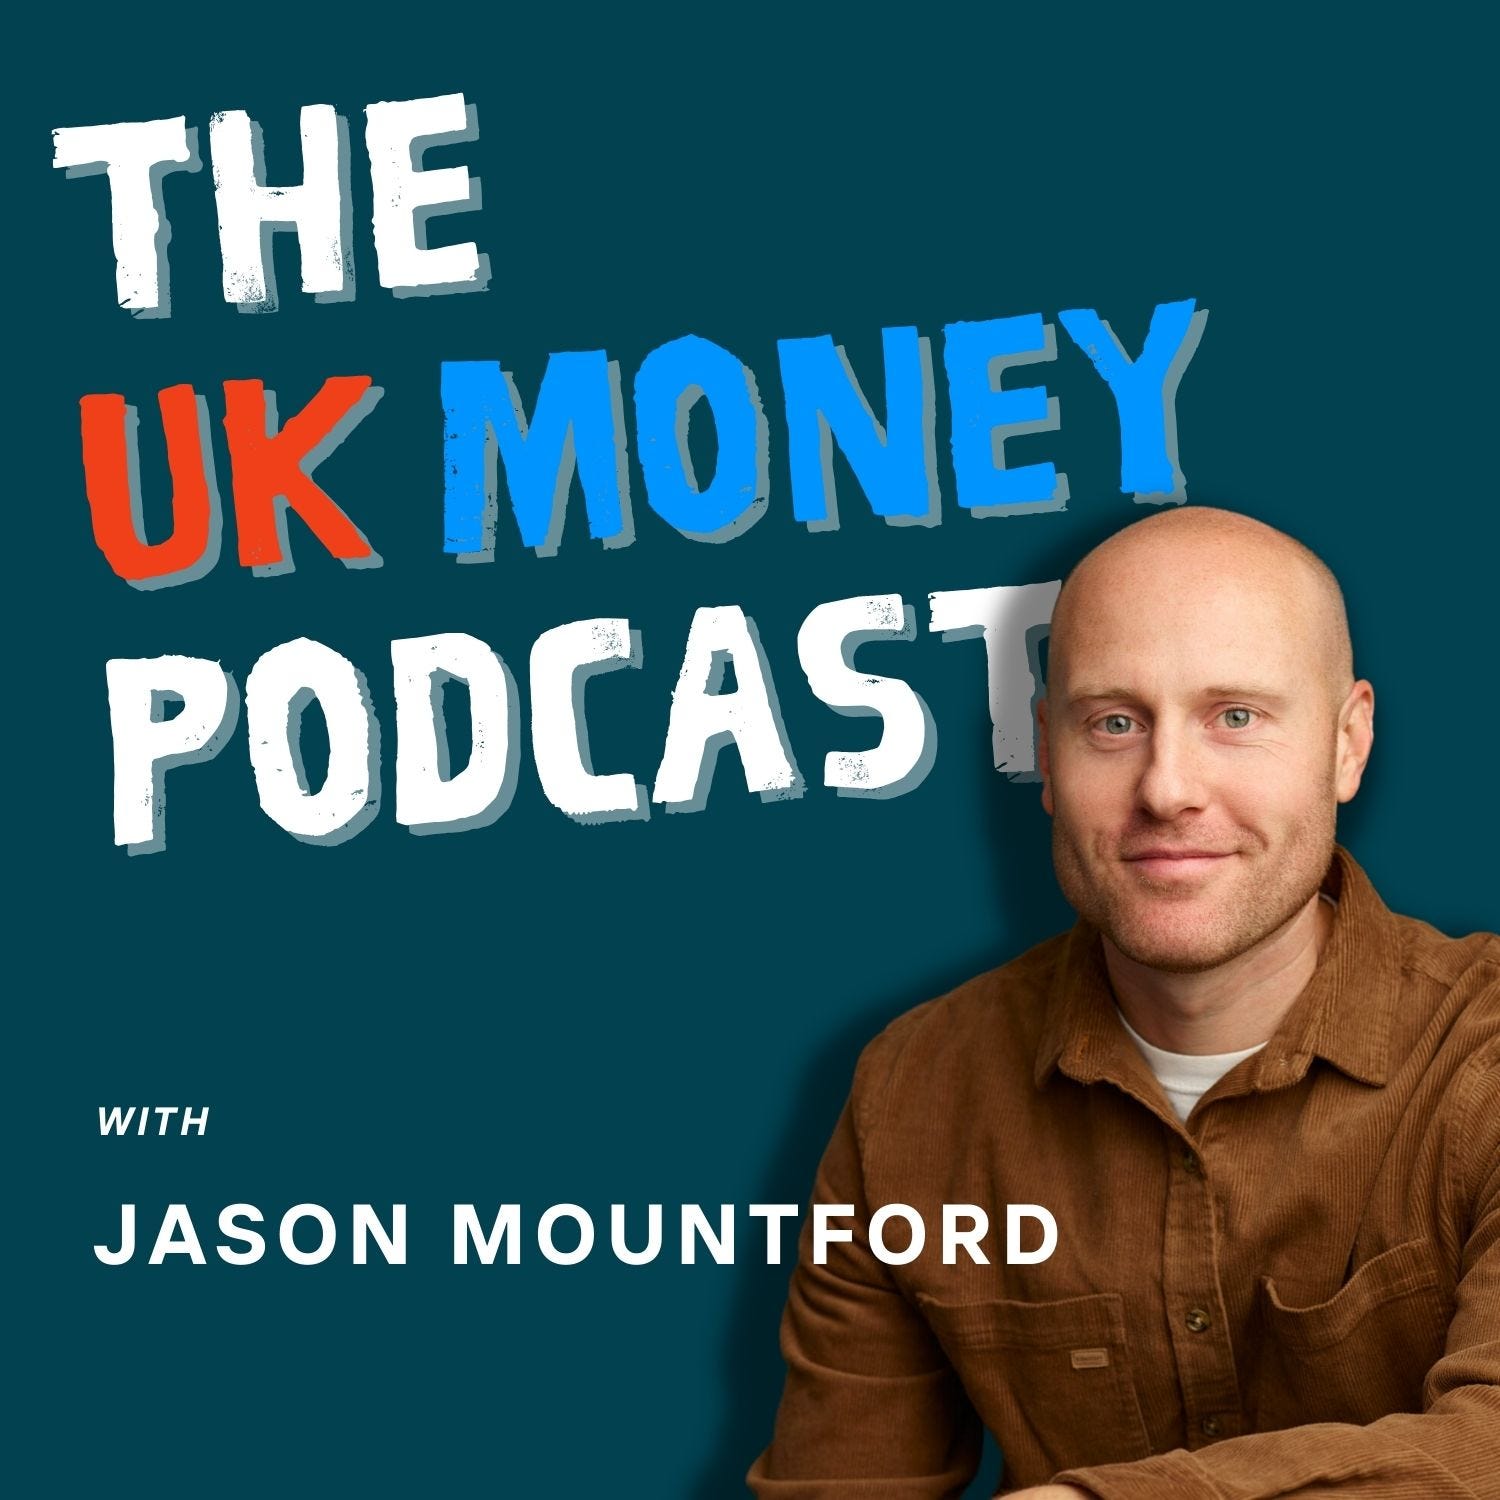 The UK MONEY PODCAST IS BACK!